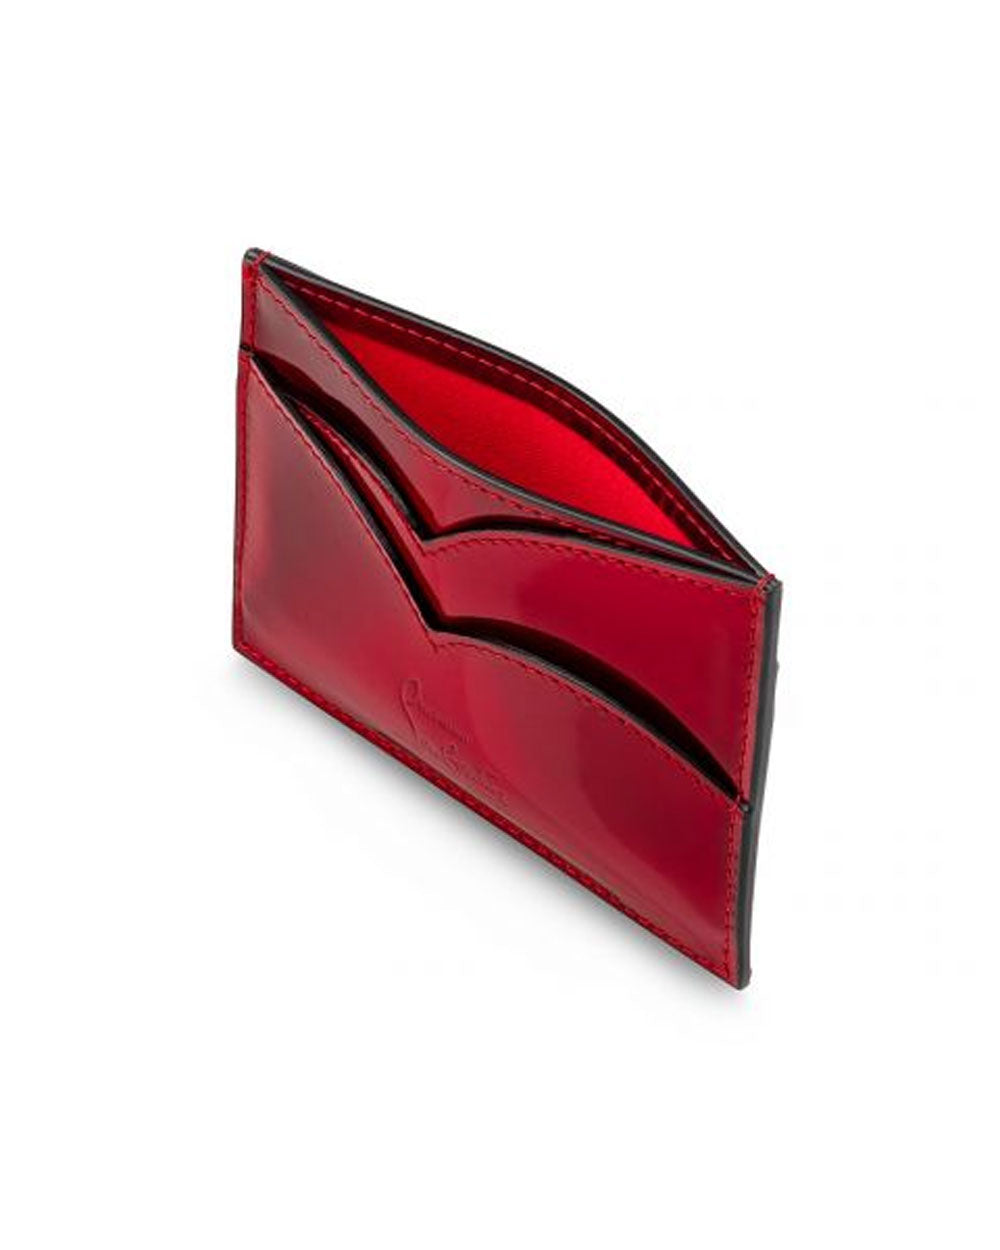 Hot Chick Card Holder in Loubi Red